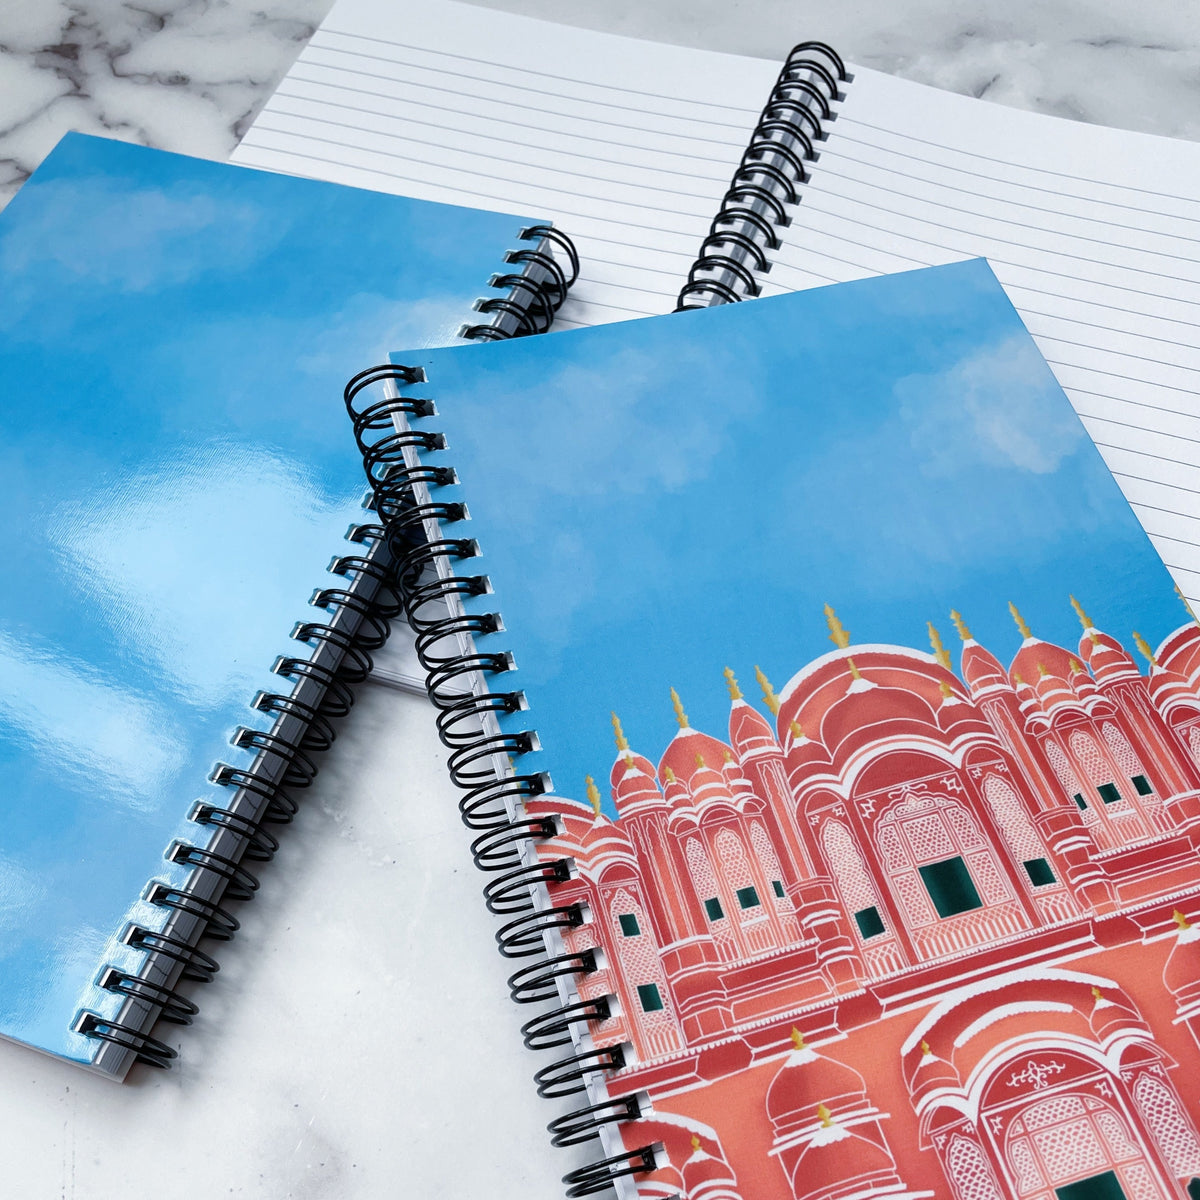 The Pink City (Jaipur) Notebook